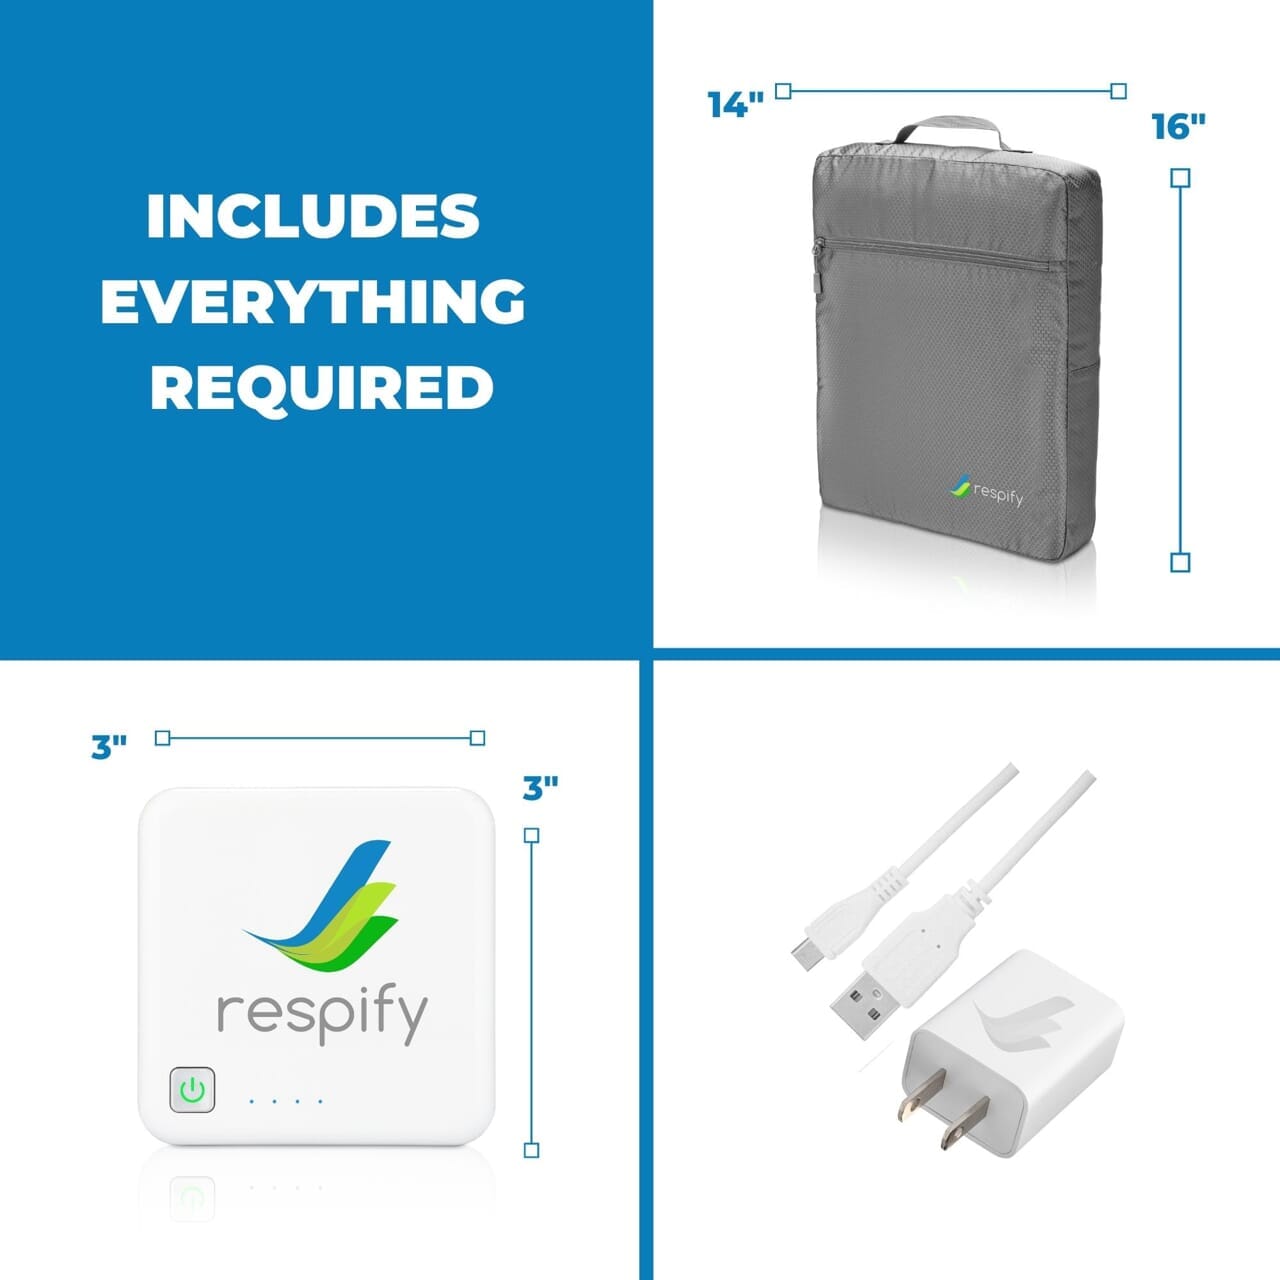 Respify Cleaner & Sanitizer - Complete Home & Travel System Respify 